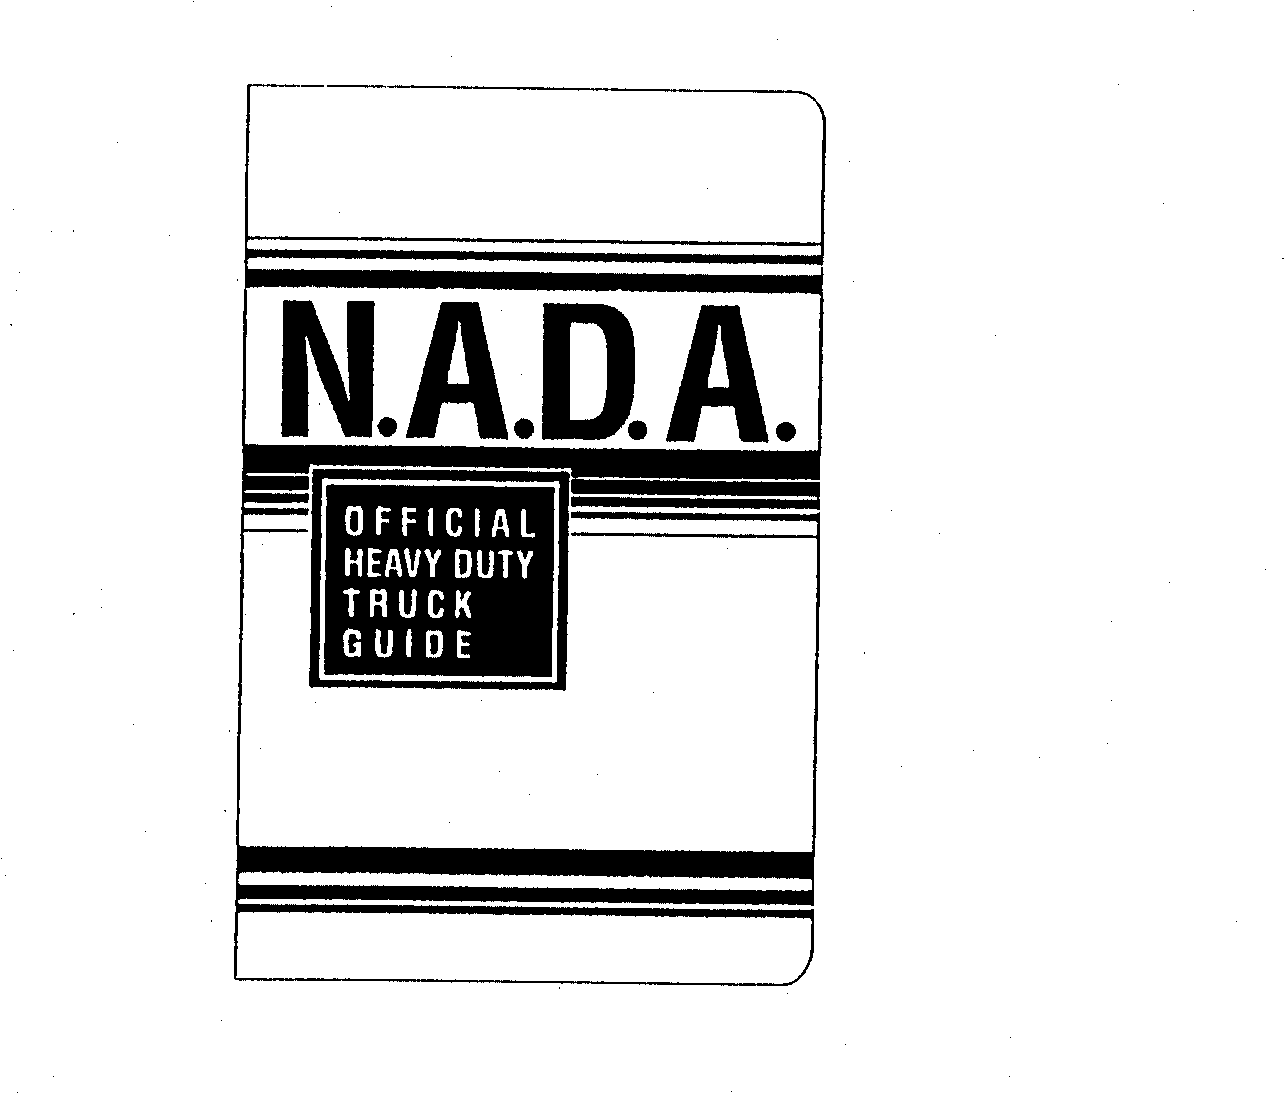  N.A.D.A. OFFICIAL HEAVY DUTY TRUCK GUIDE